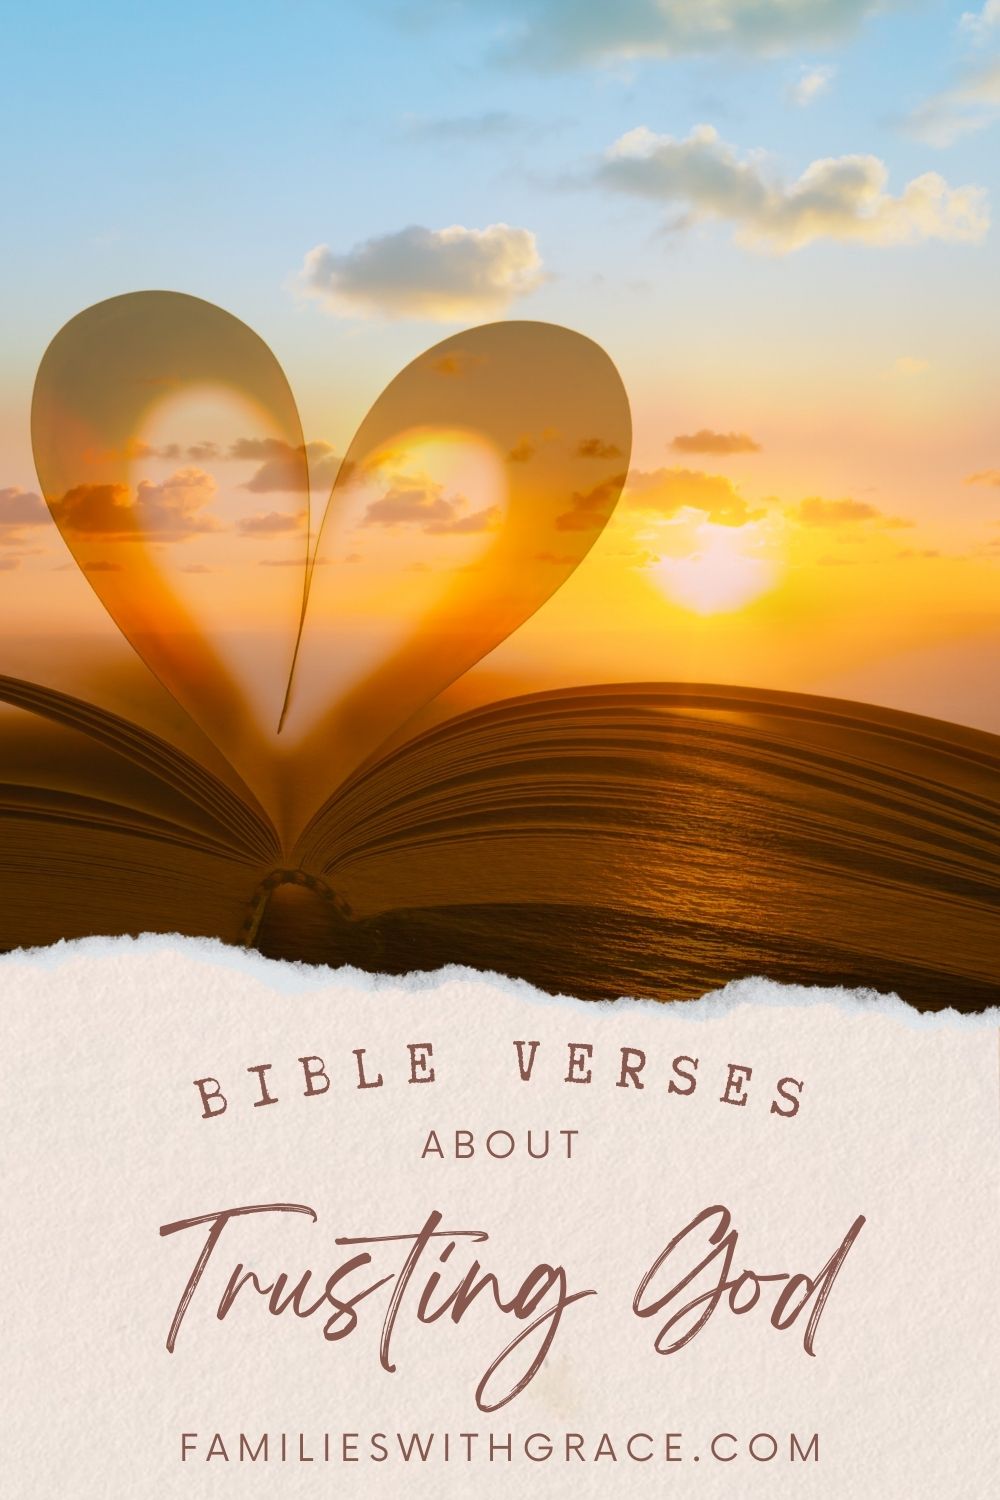 Bible verses about leaning on and trusting God